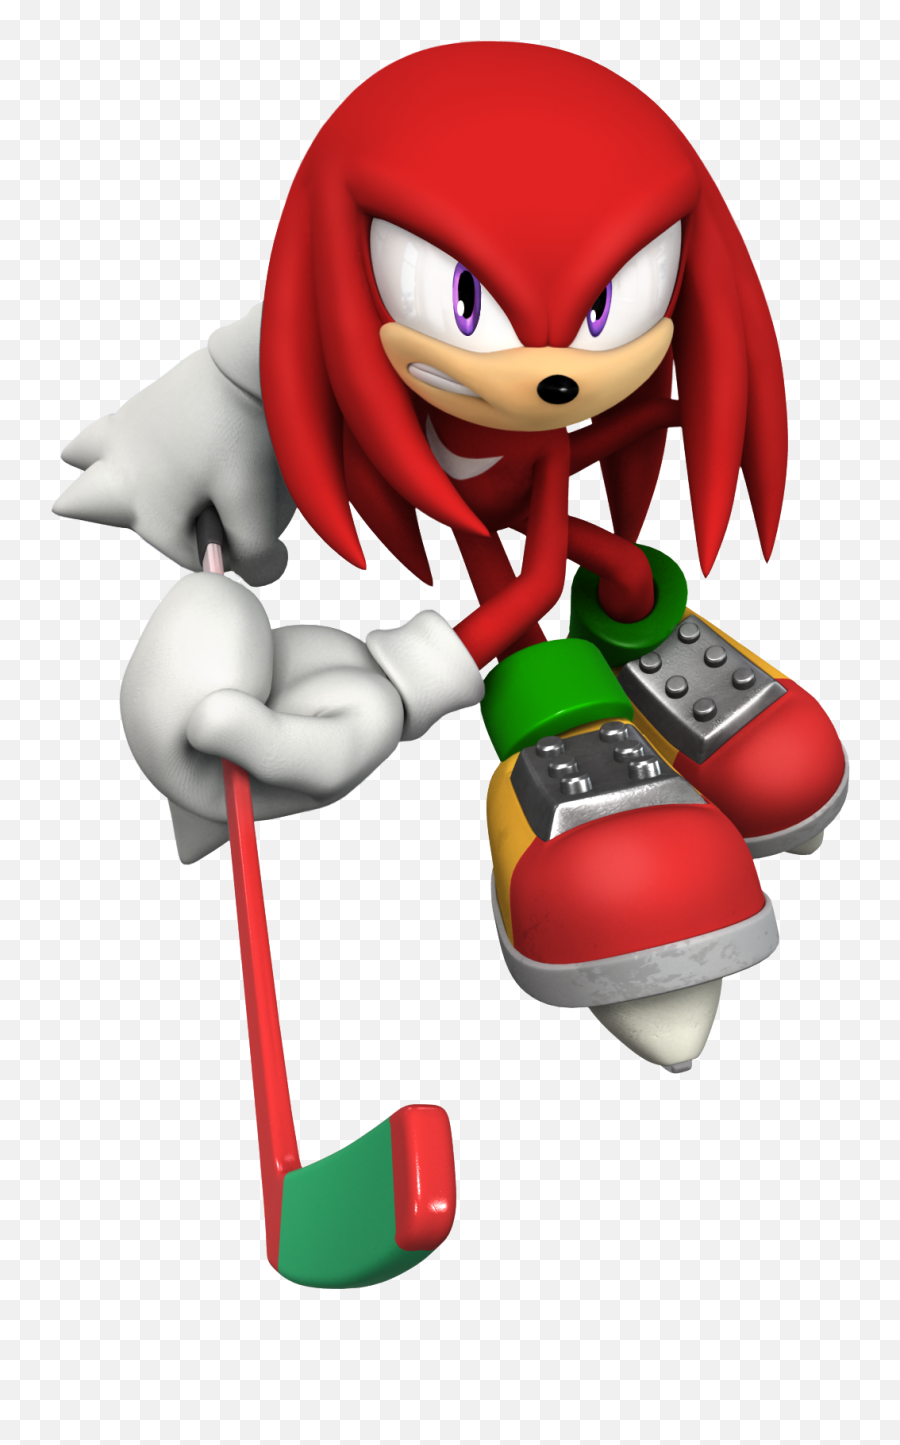 Wintergames Knuckles - Mario And Sonic At The Olympic Winter Games Knuckles Png,Knuckles The Echidna Png